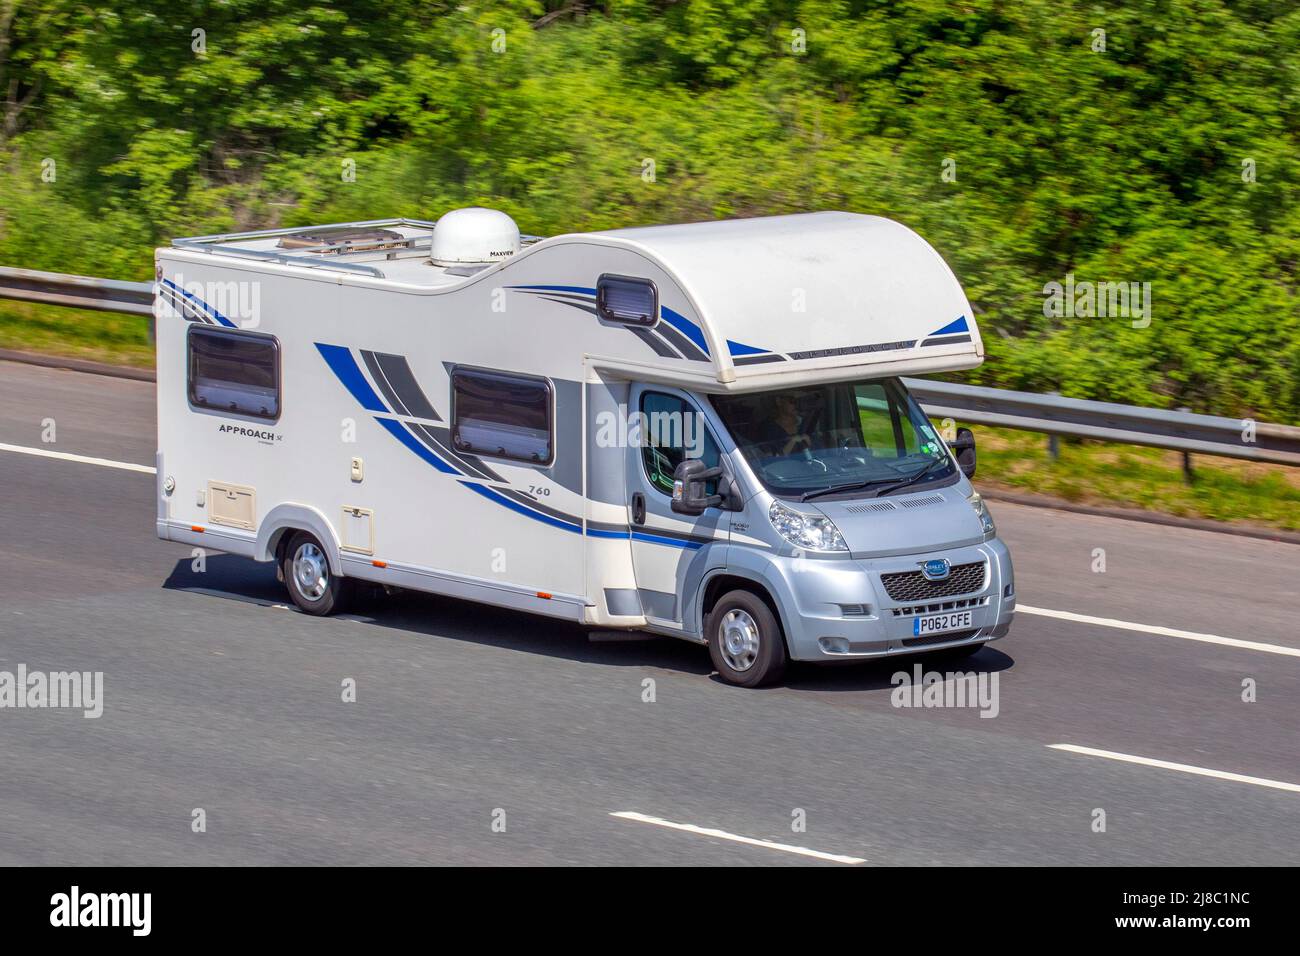 Bailey Approach 760 Campervan. 2012 Peugeot Boxer HDI 335 Zuckoff TL 2198cc Diesel motorhome; driving on the M61 Motorway, Manchester, UK Stock Photo